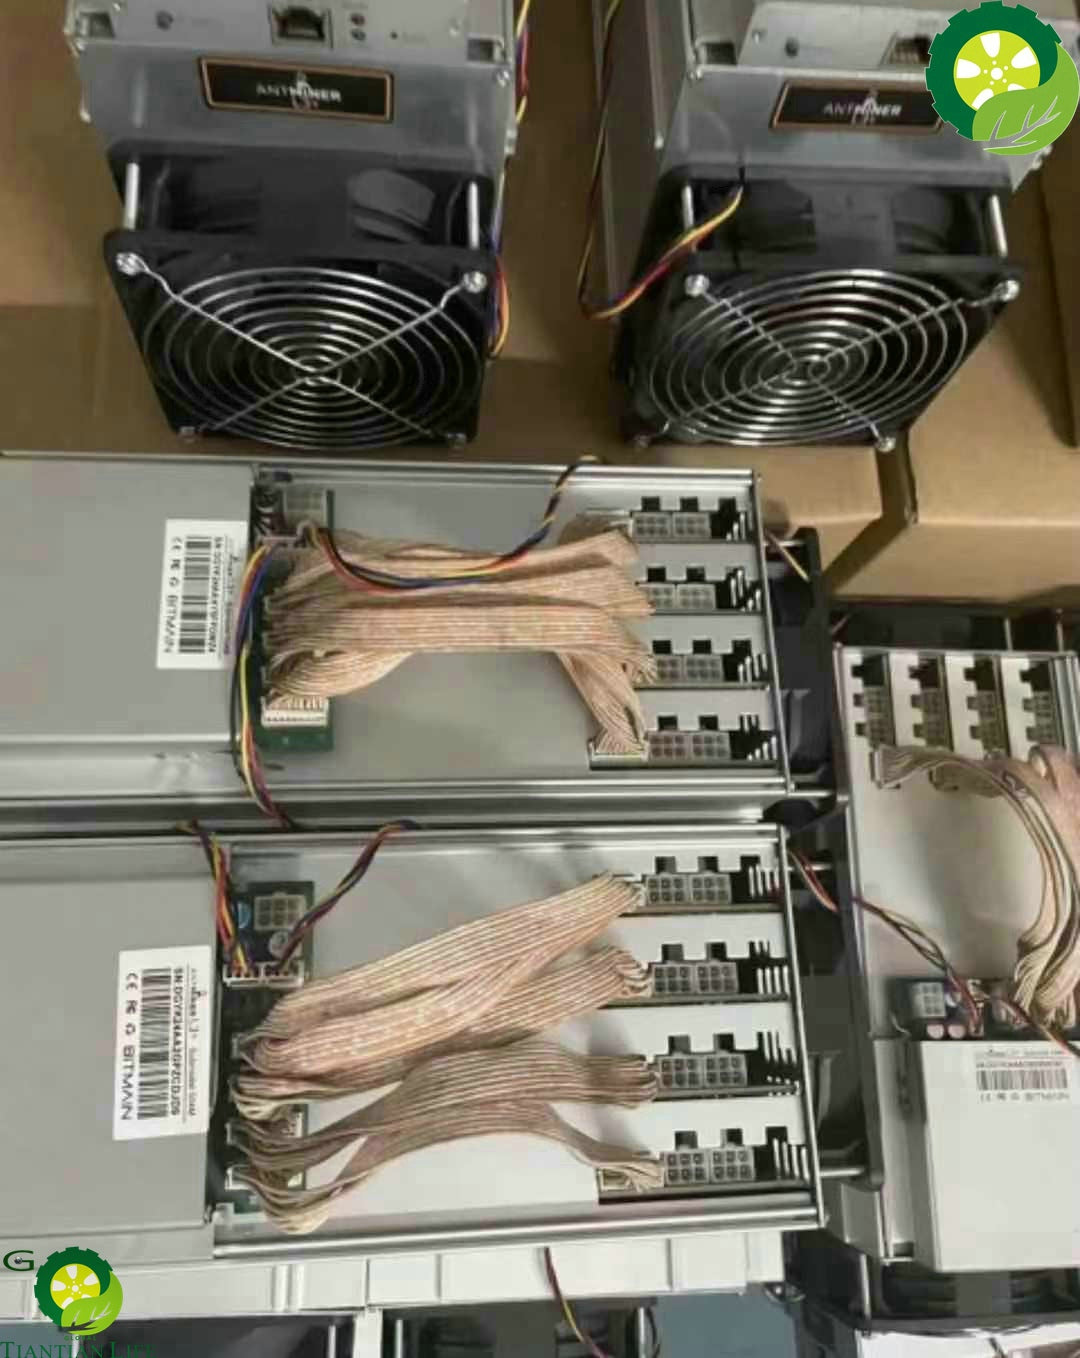 Bitmain Antminer L3+ with PSU Scrypt Asic used TIANTIAN LIFE Market Place